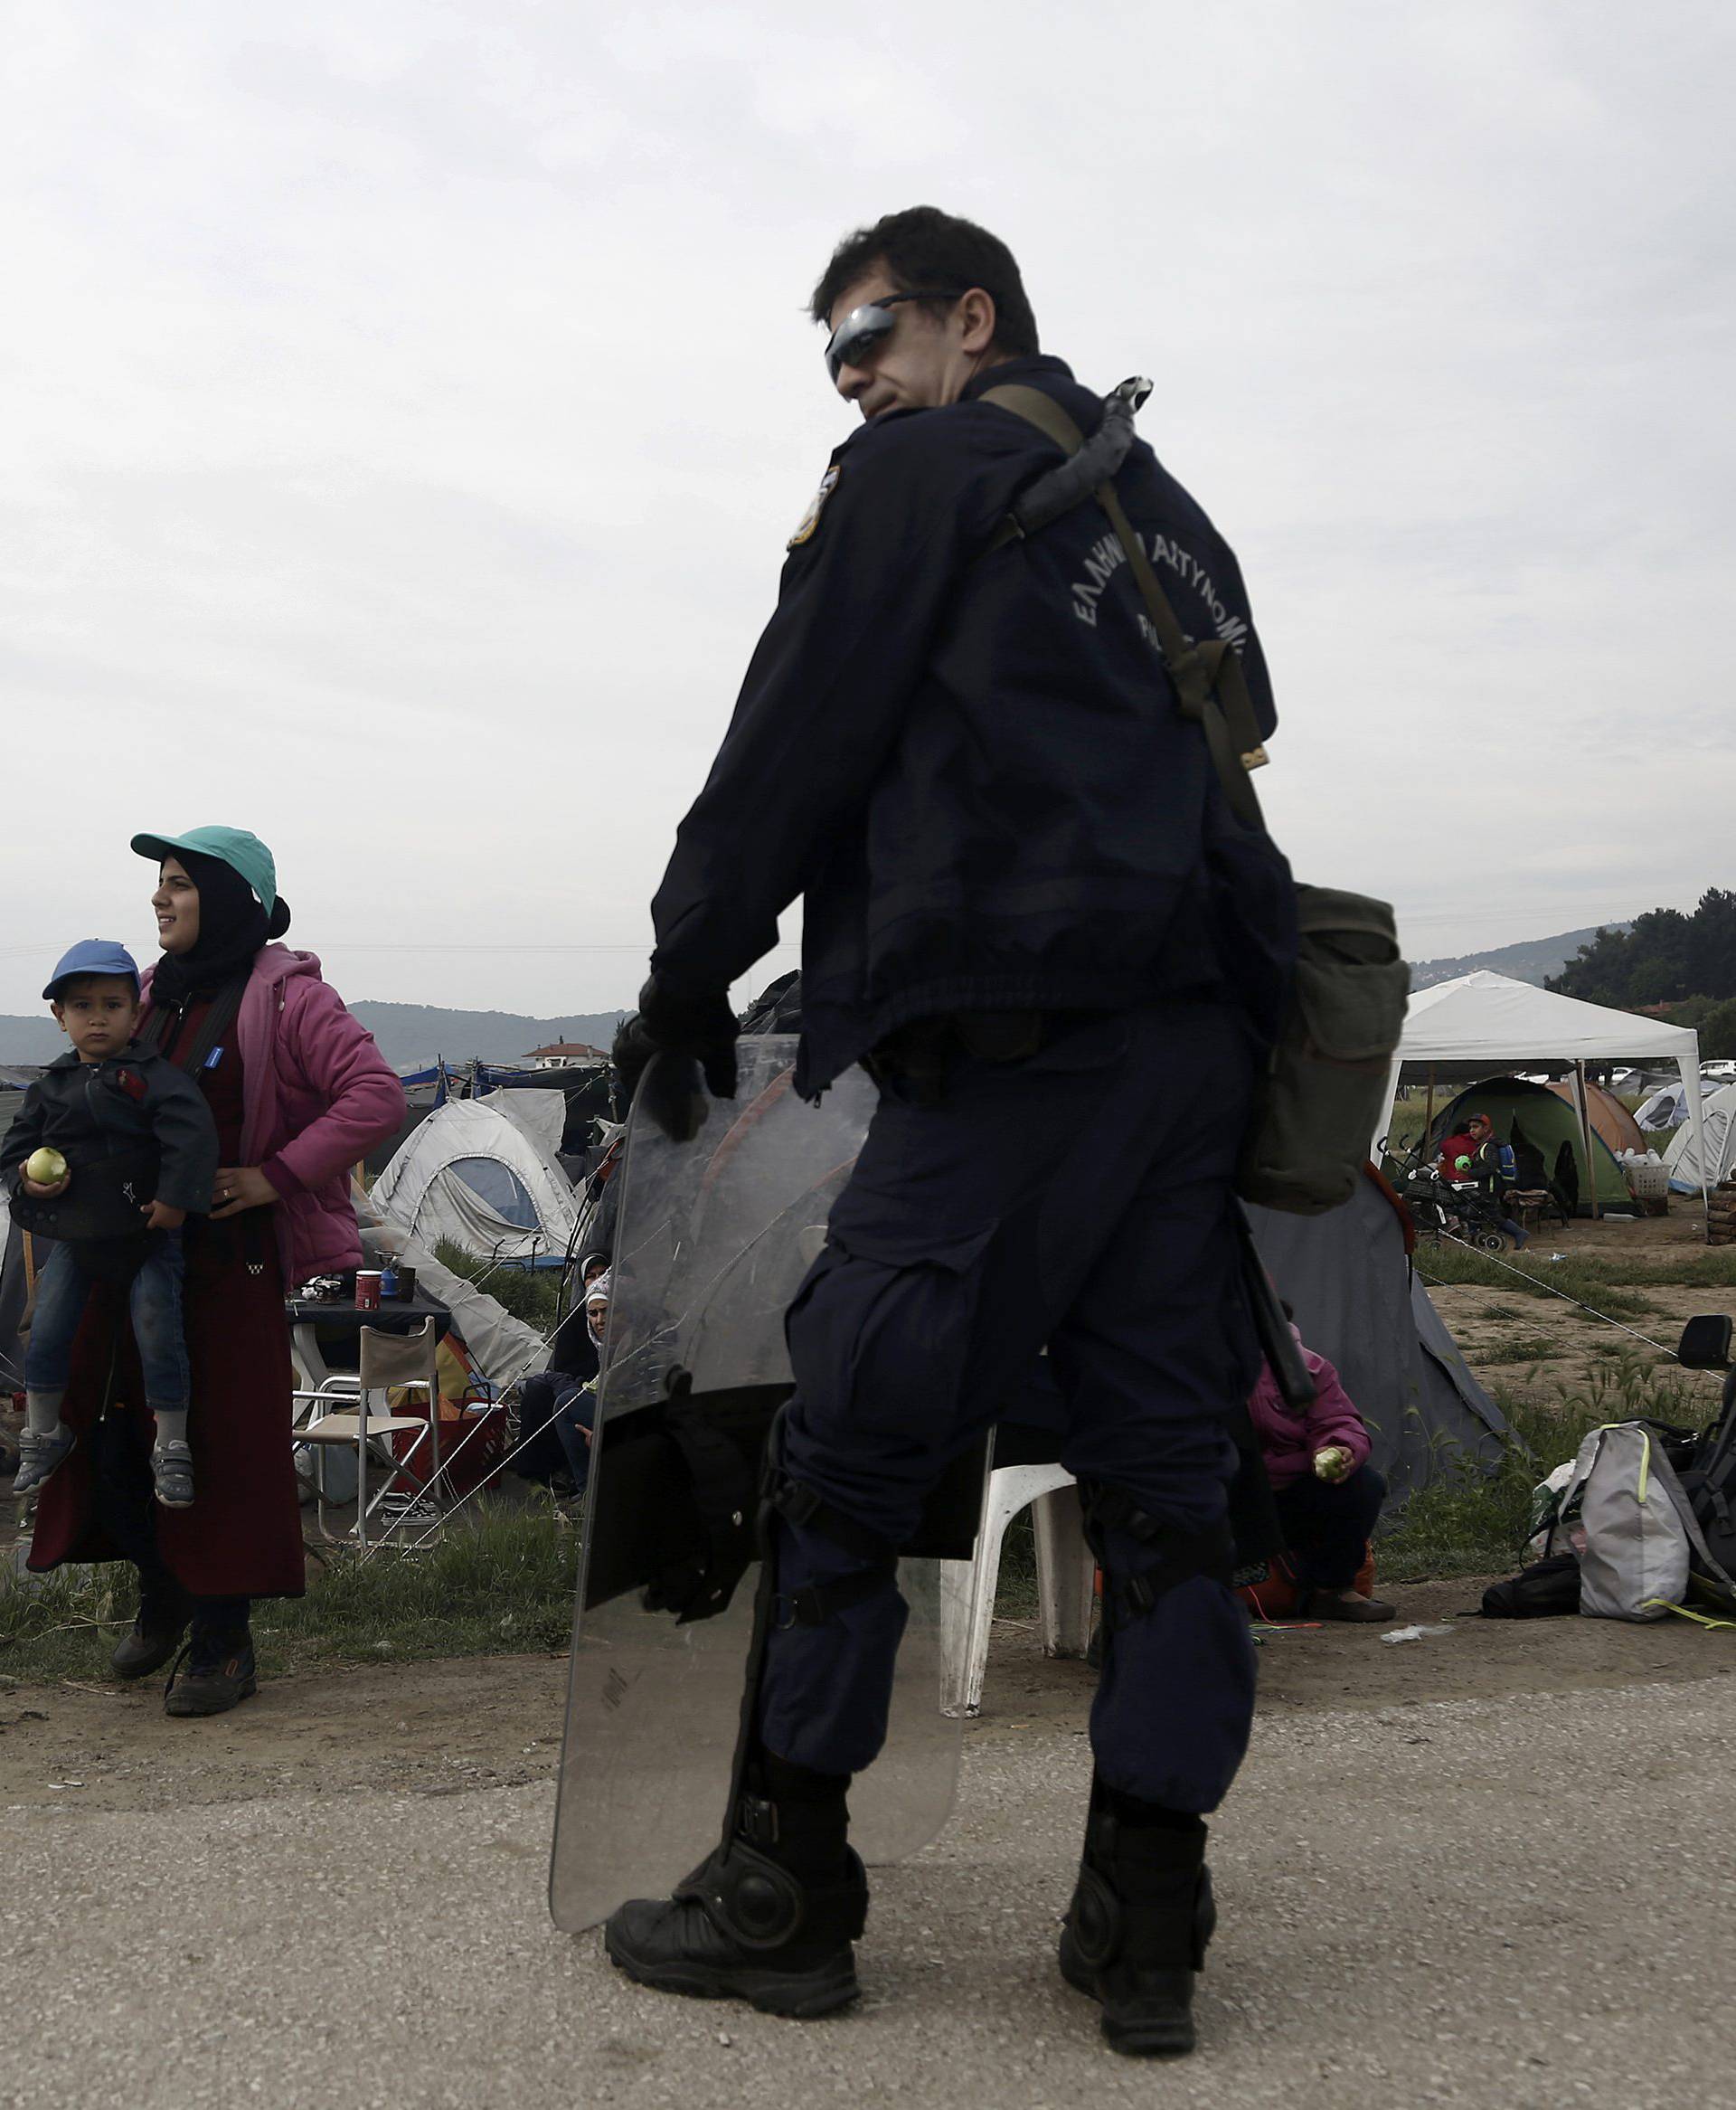 Police operation to evacuate a makeshift camp for refugees and migrants near the village of Idomeni